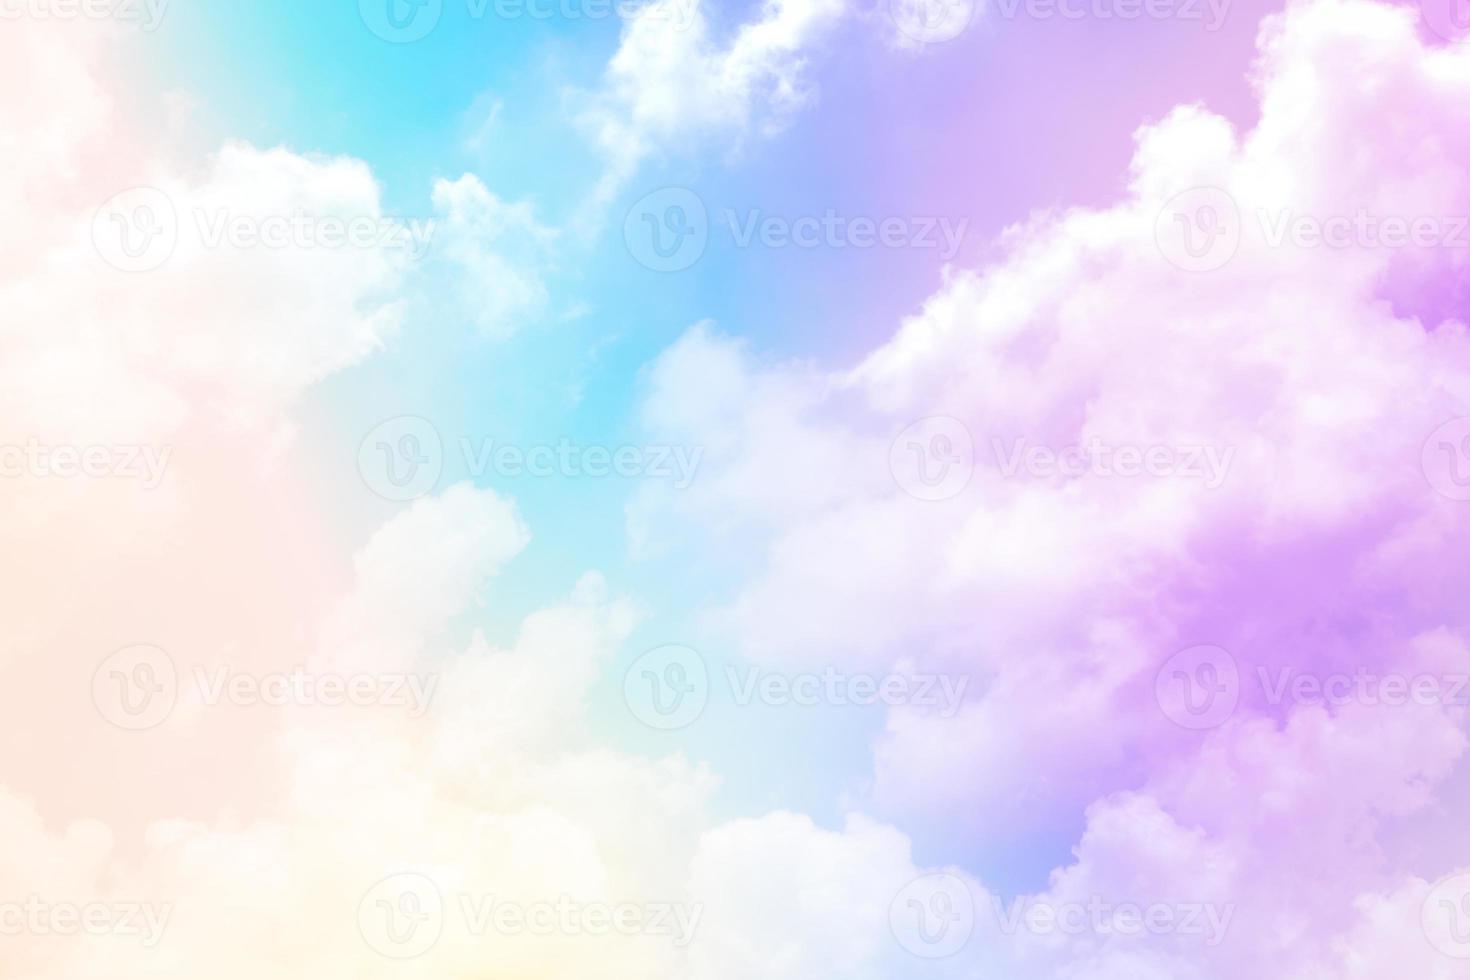 beauty sweet pastel blue orange  colorful with fluffy clouds on sky. multi color rainbow image. abstract fantasy growing light photo